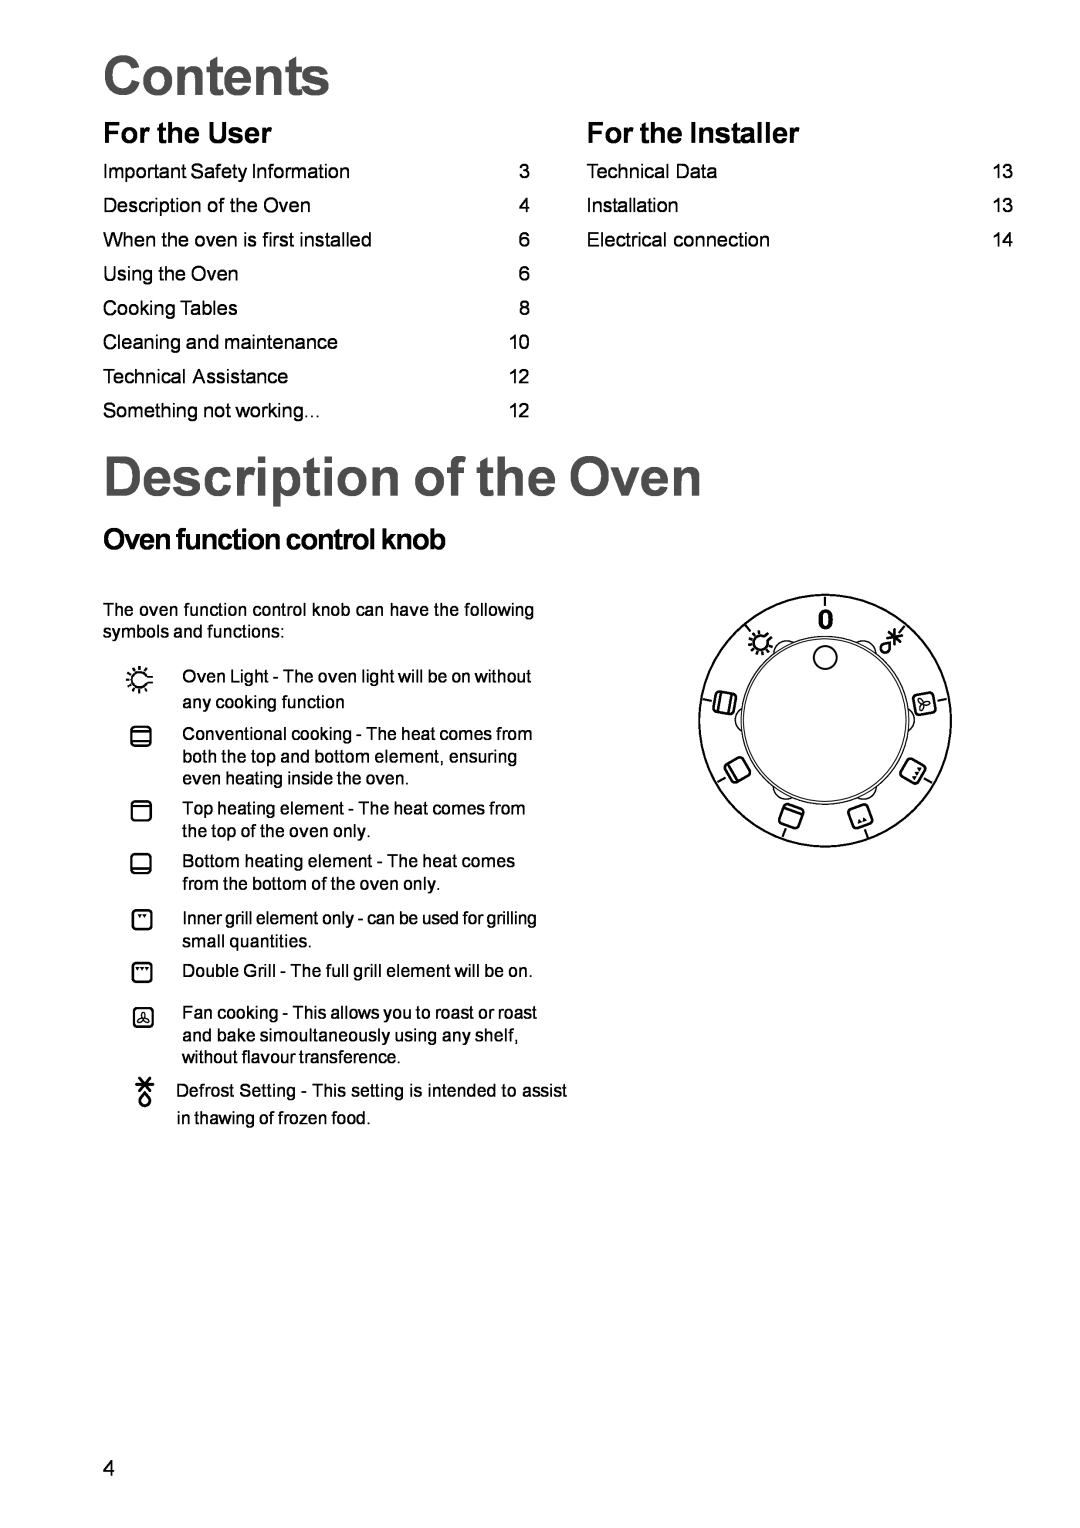 Zanussi manual Contents, Description of the Oven, For the User, For the Installer, Oven function control knob 